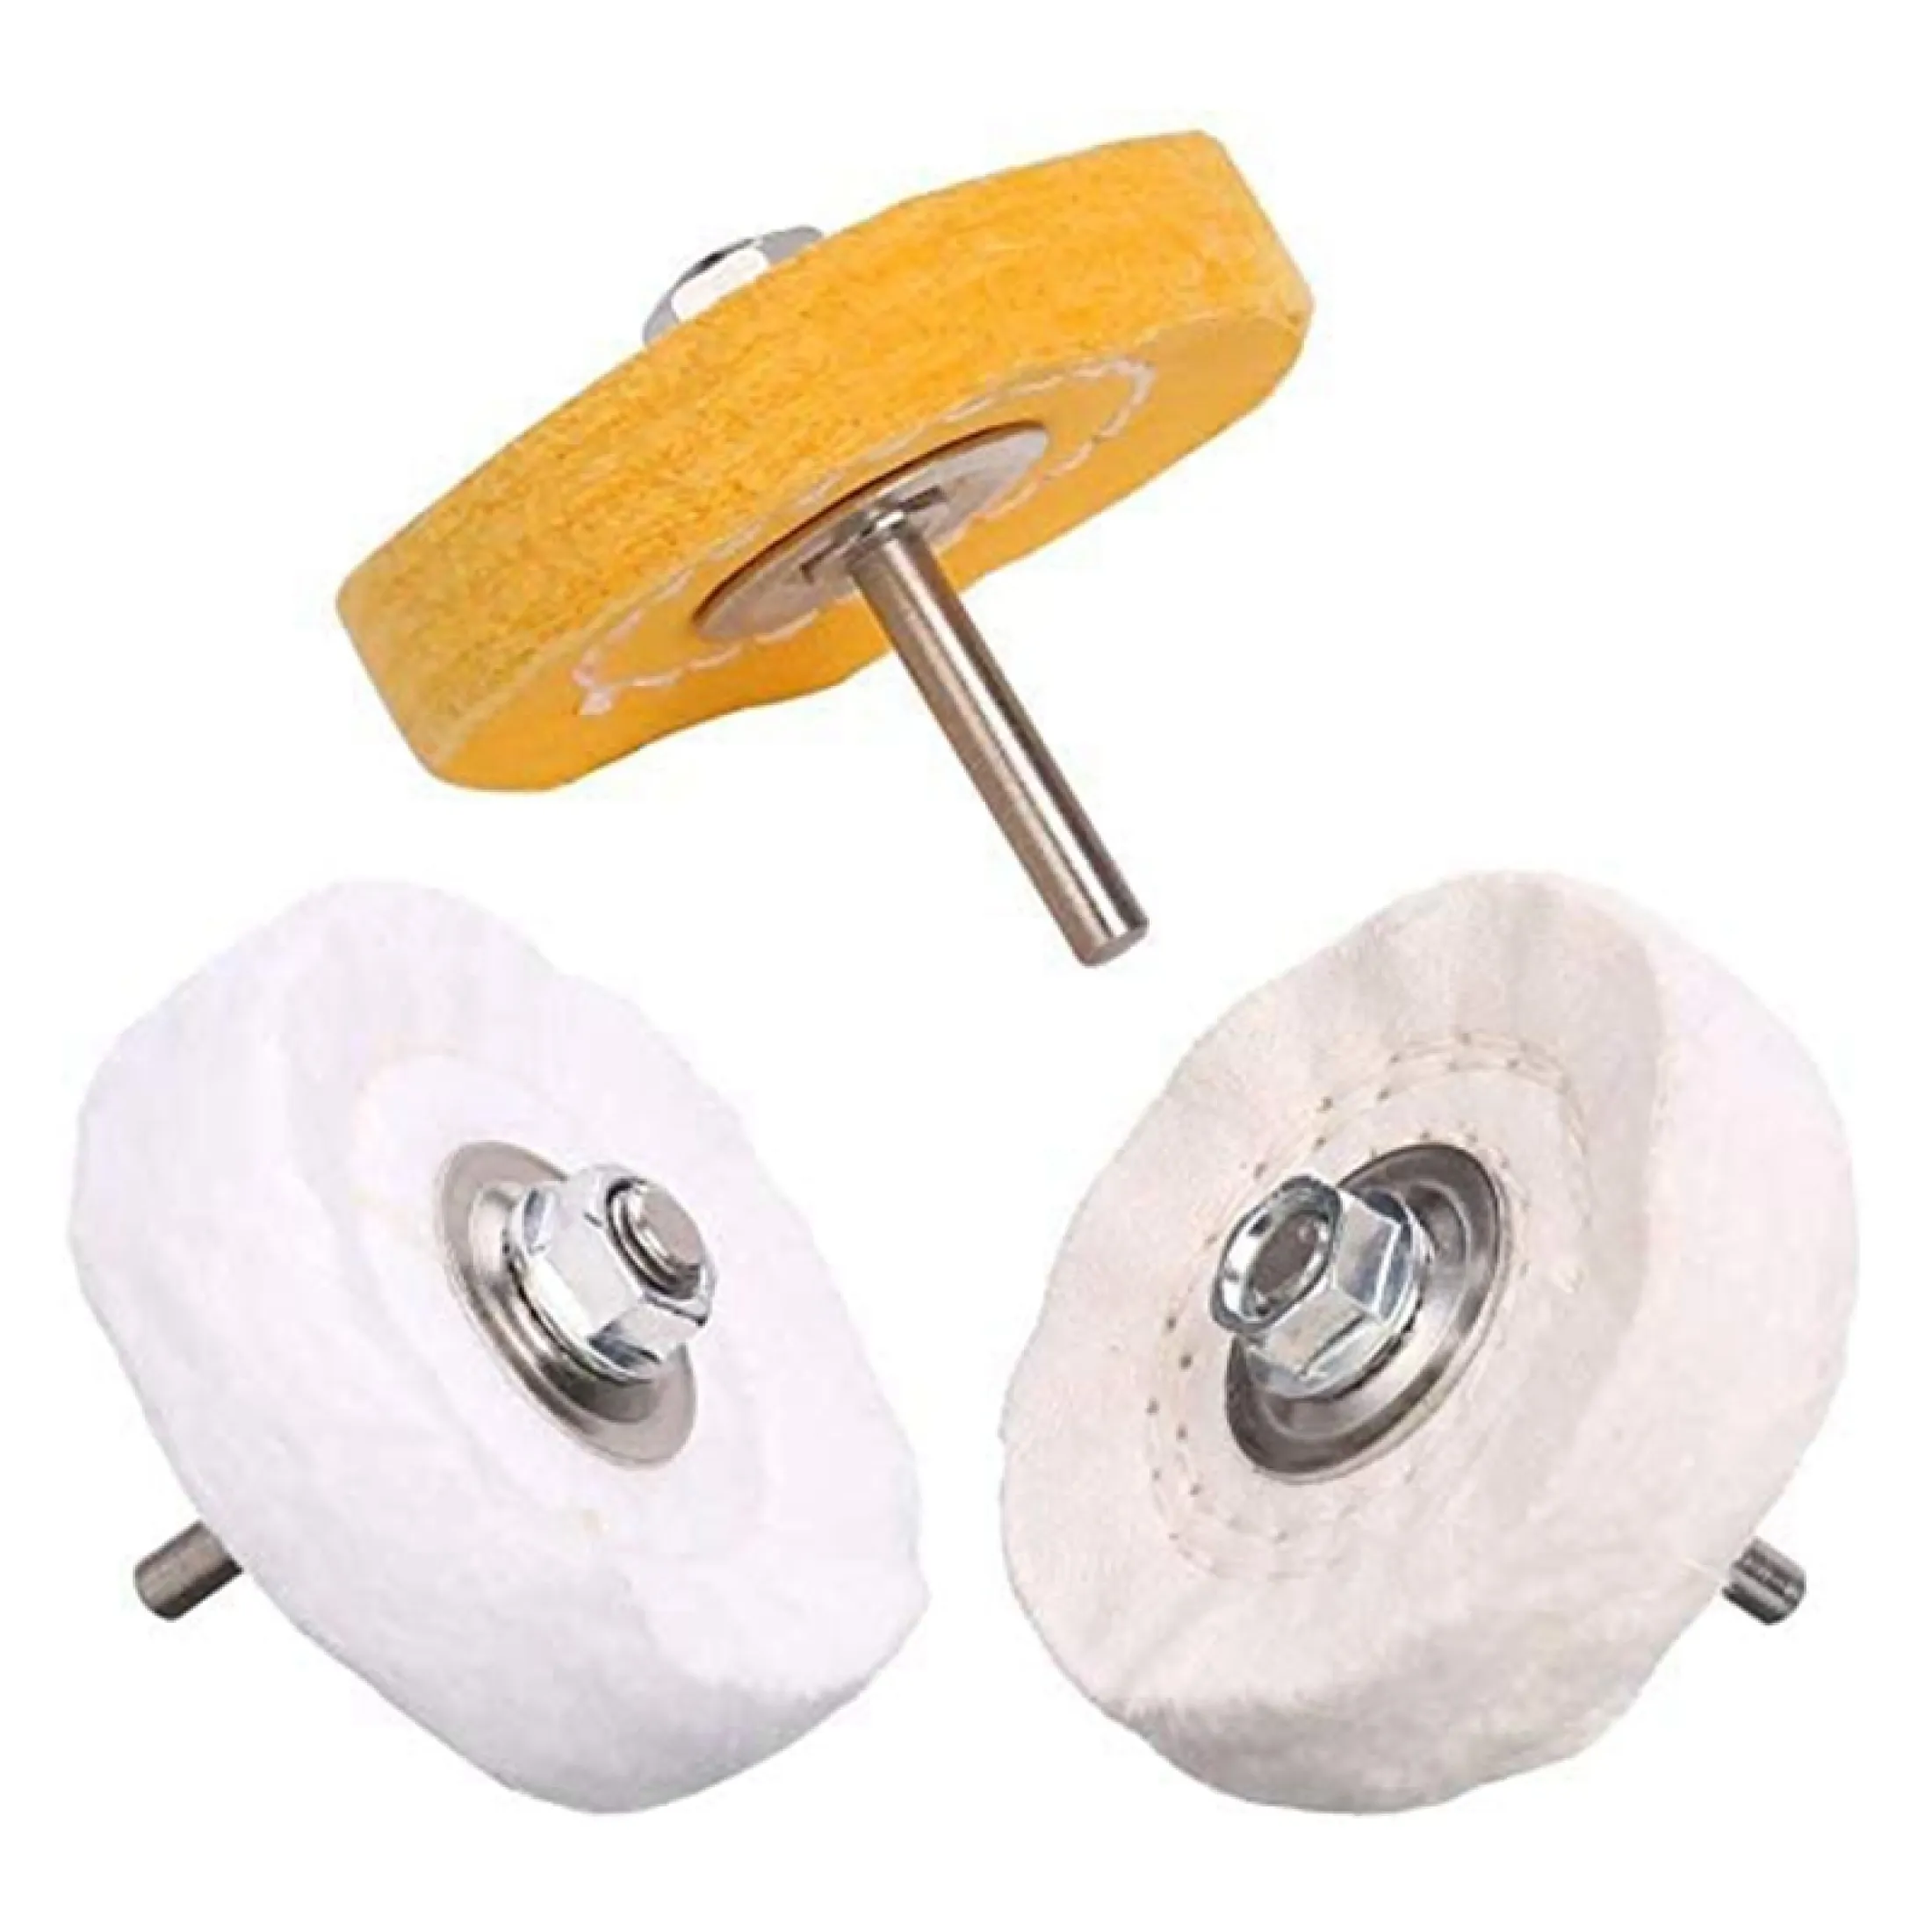 3pcs Buffing Polishing Wheel 2 5 Inch Arbor Hole For Bench Grinder Buffer Tool With 1 4 Inch Shank For Drill Lazada Indonesia